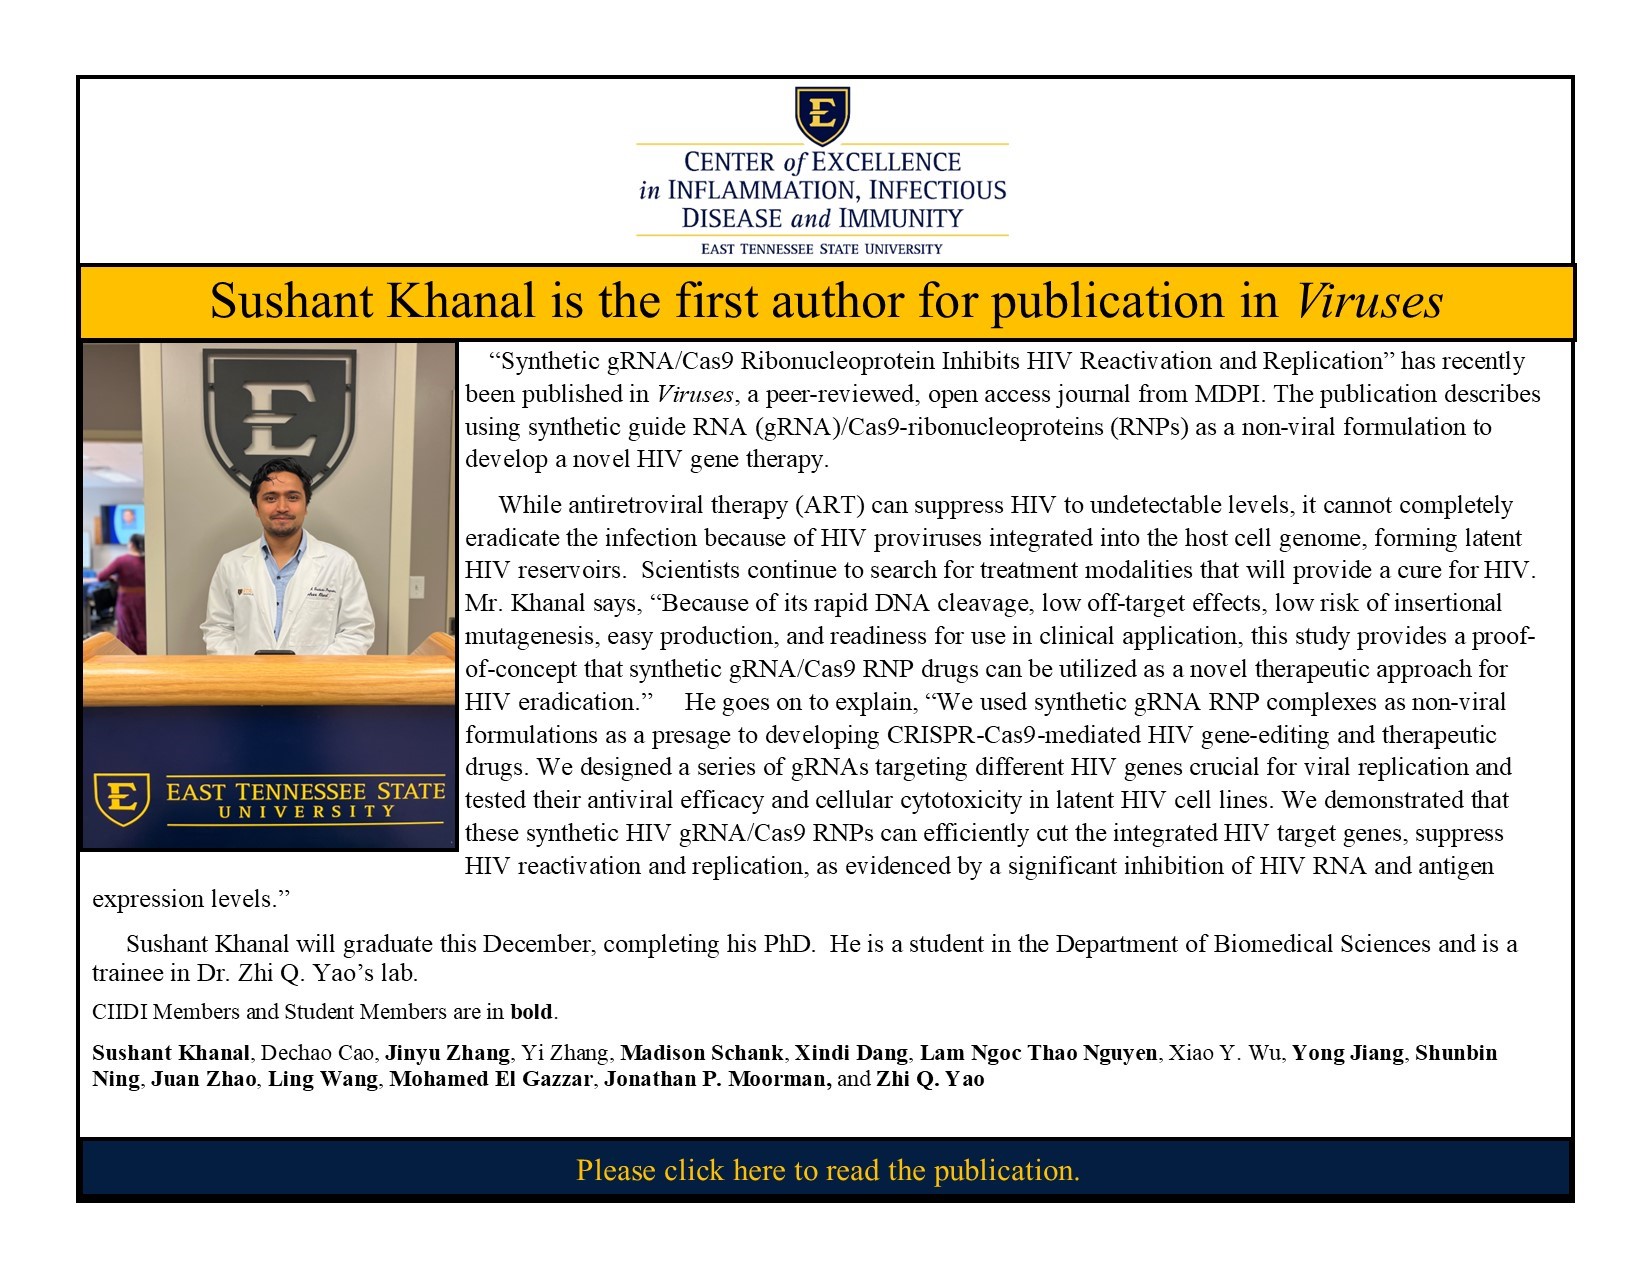 image for Sushant Khanal is the first author in Viruses